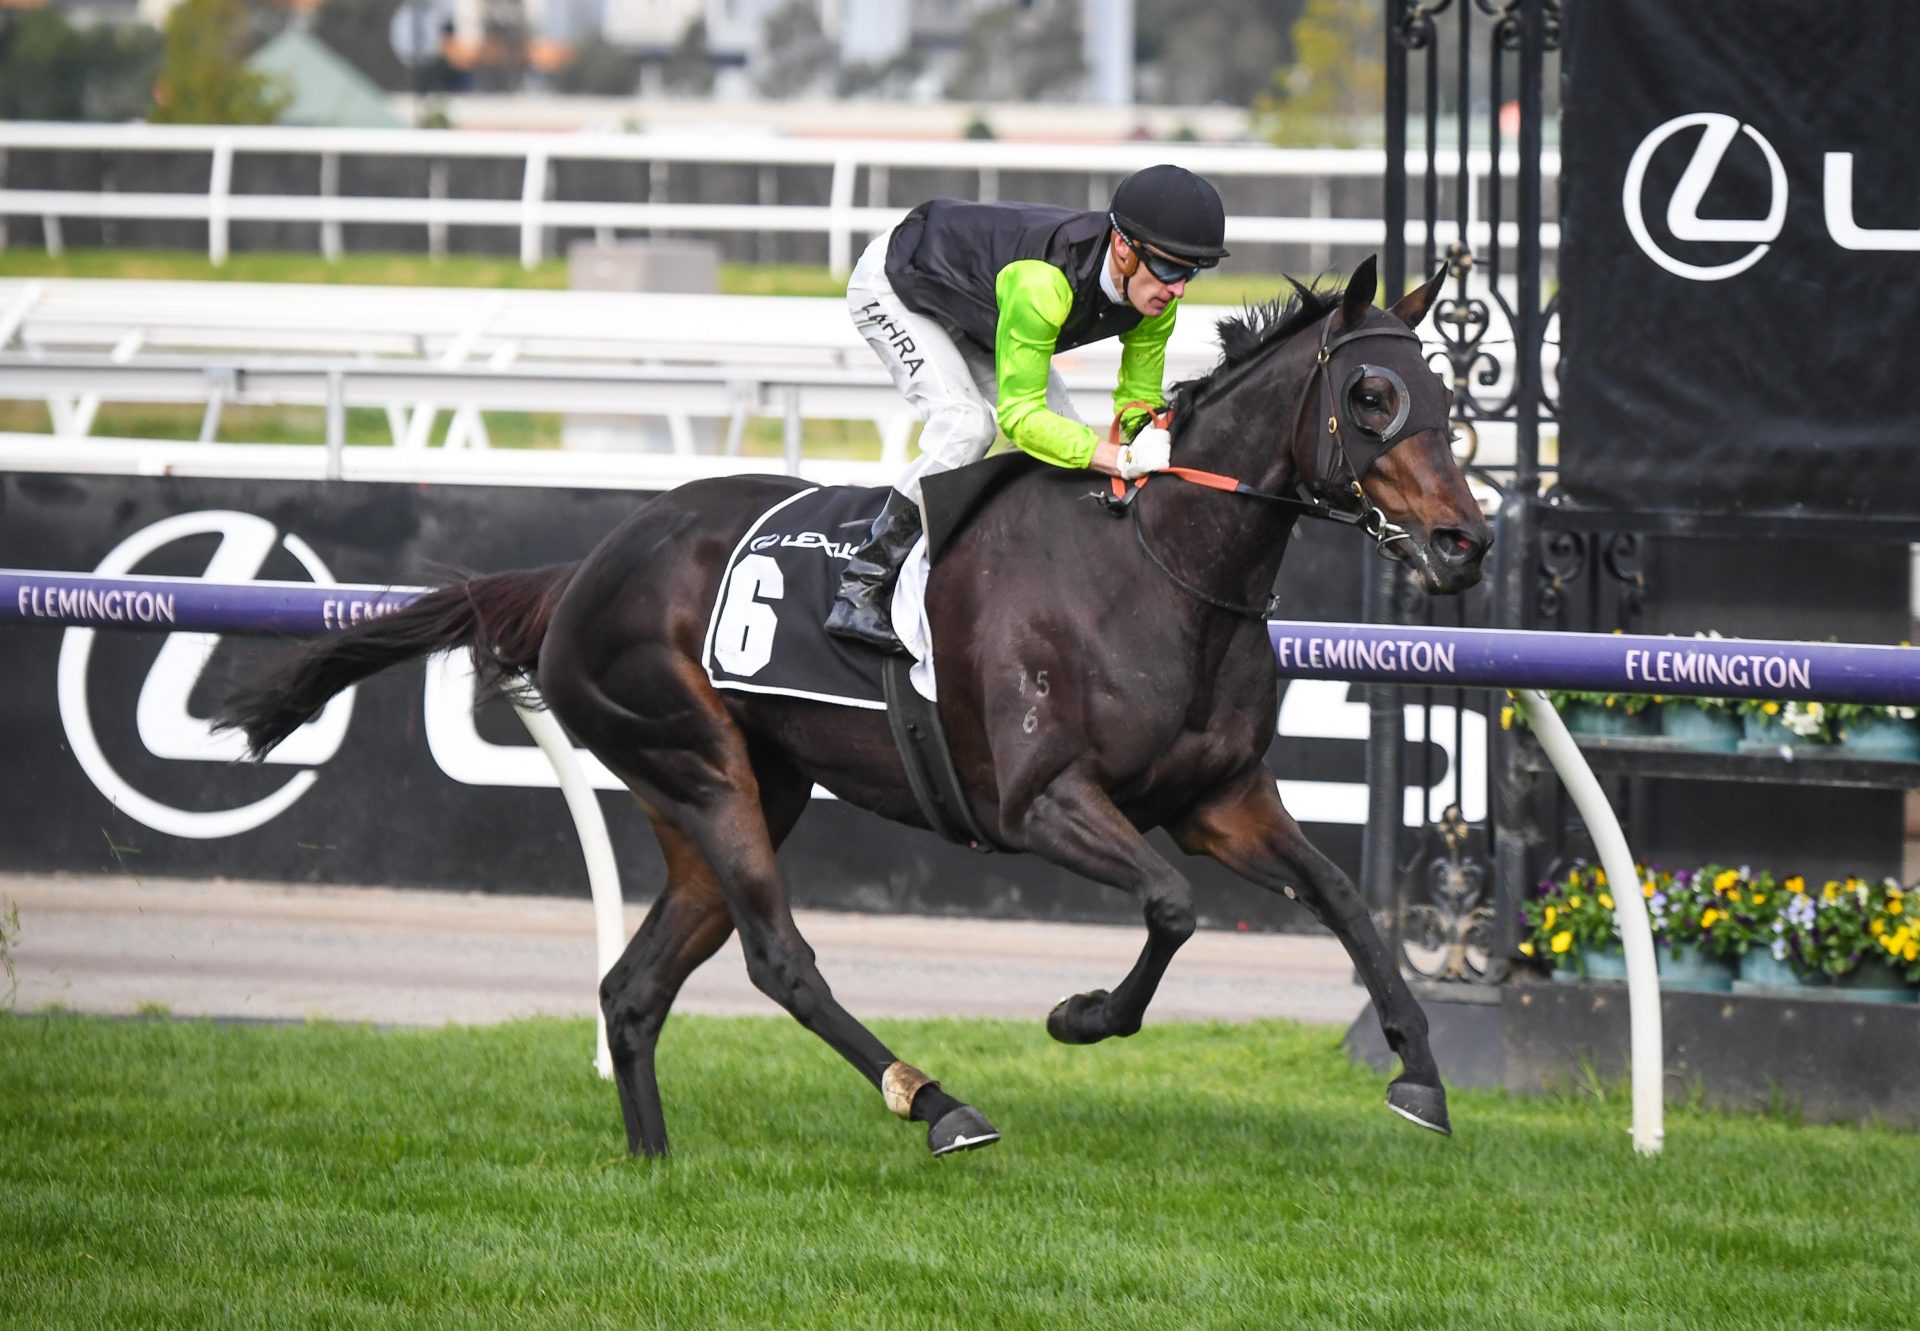 Realm Of Flowers (So You Think) winning the Gr.3 Ramsden Stakes at Flemington